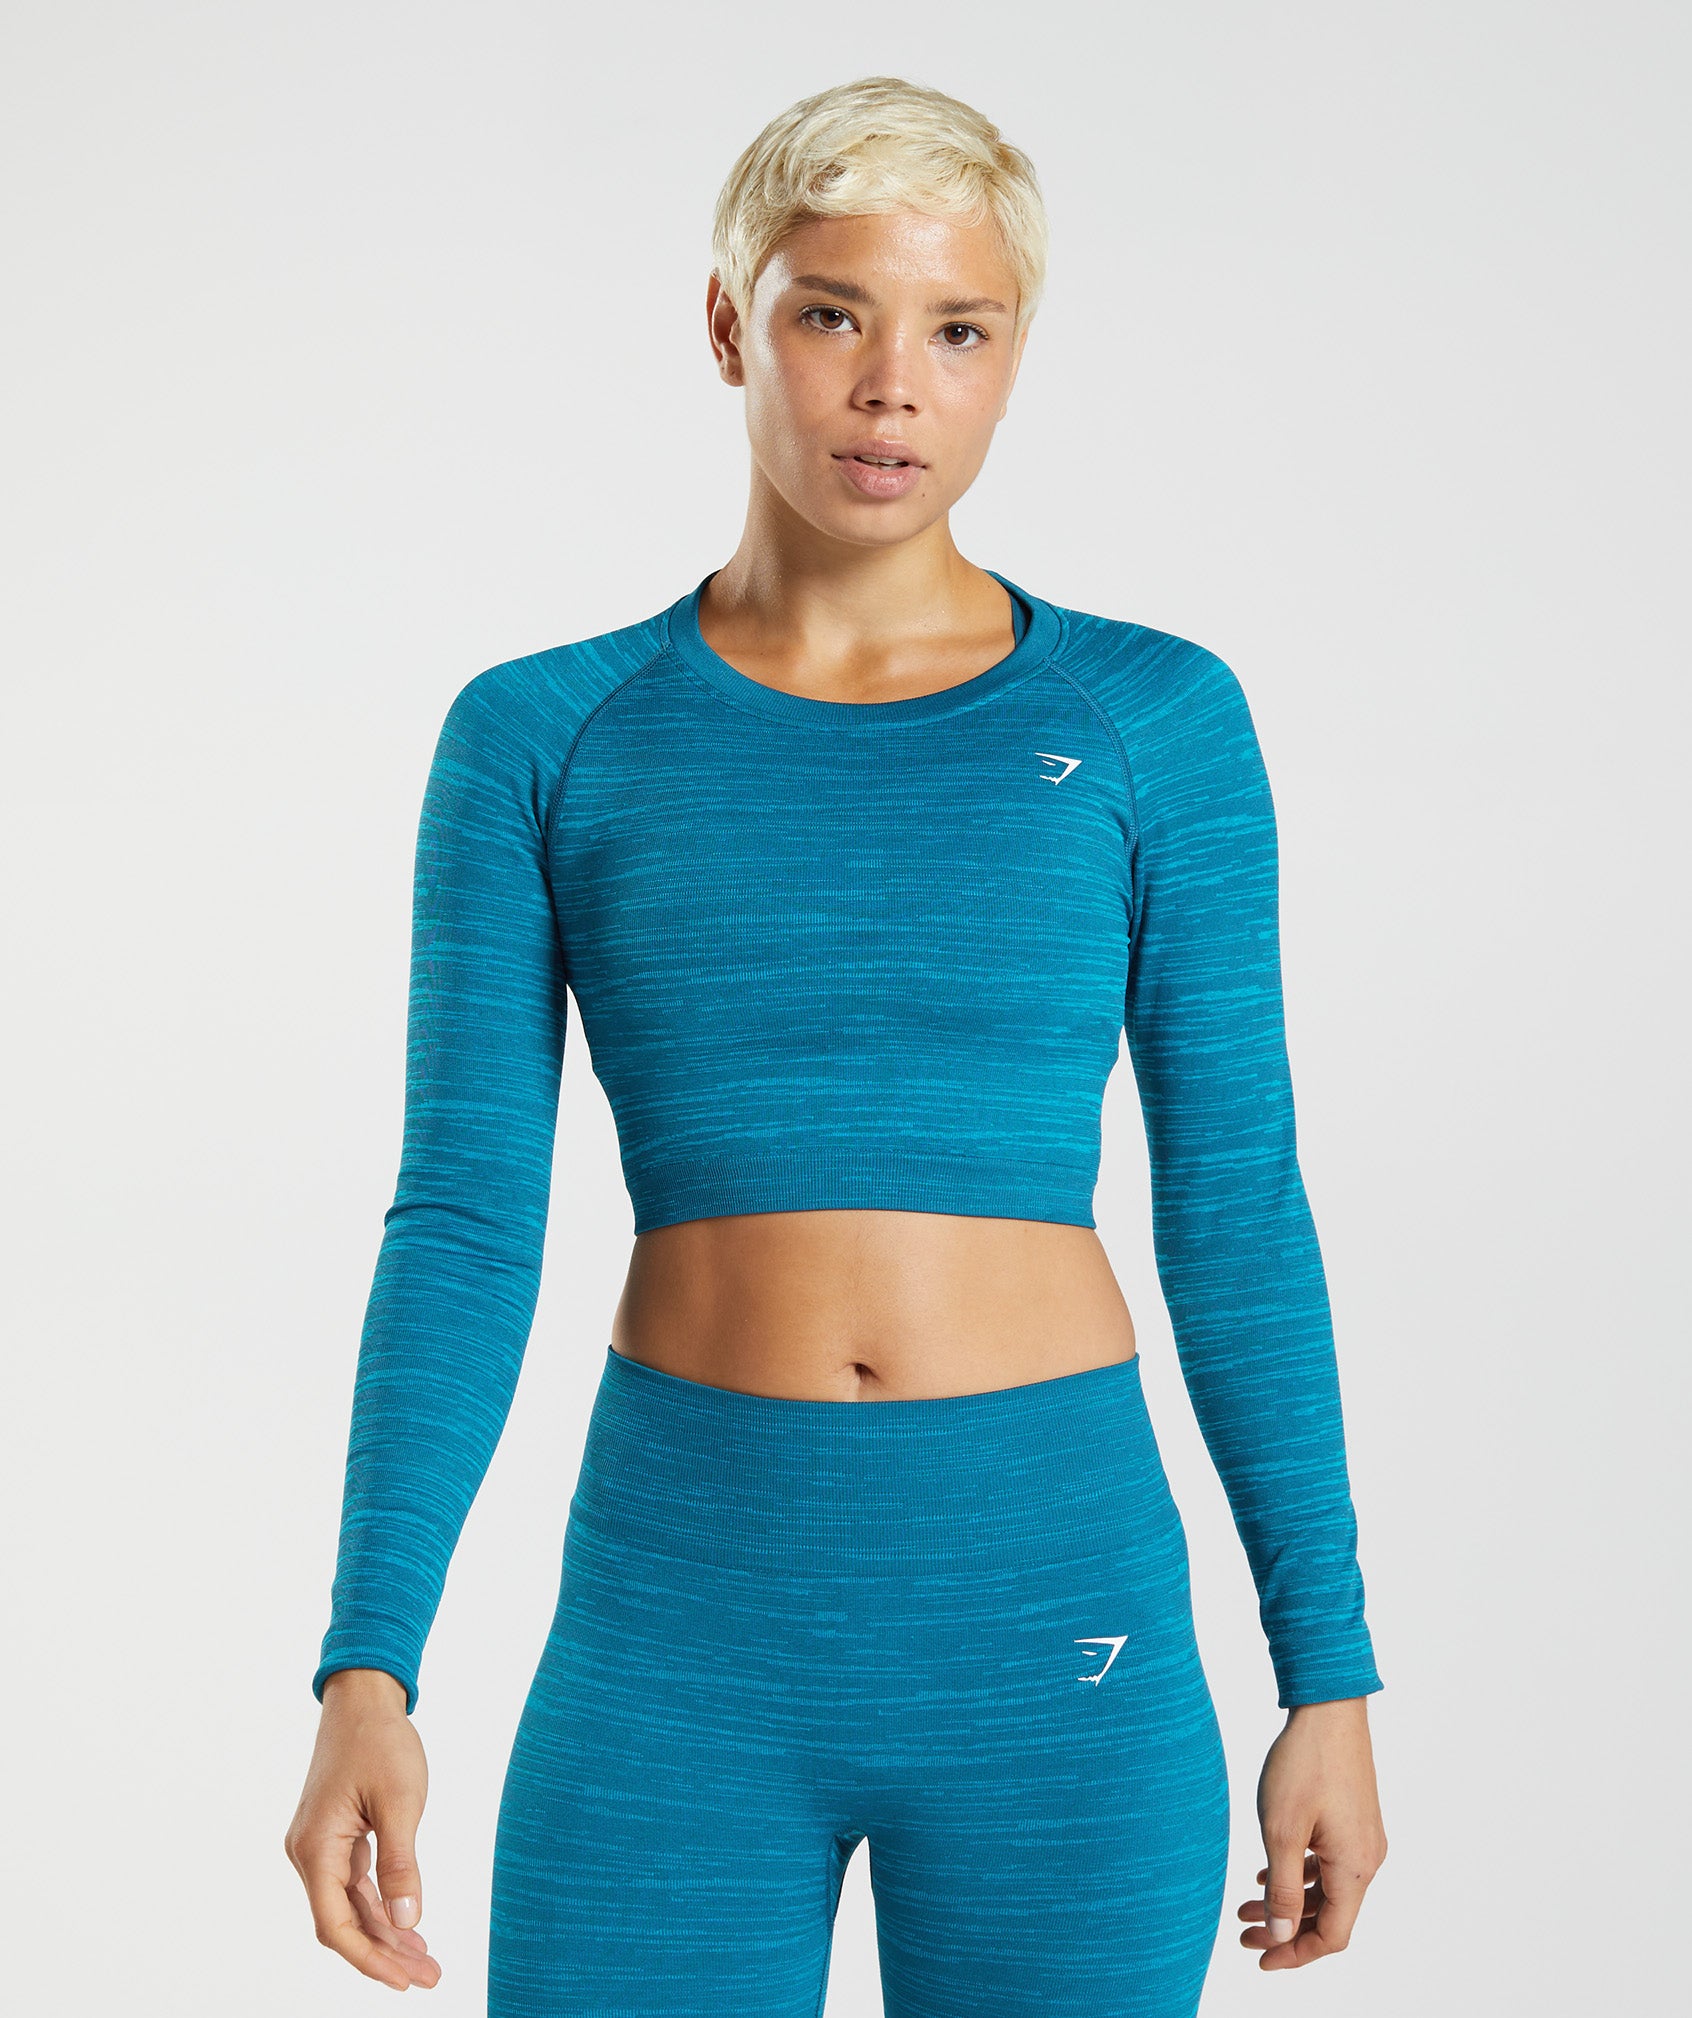 Gymshark Cropped Top Orange Size XS - $22 (26% Off Retail) - From Kaylyn